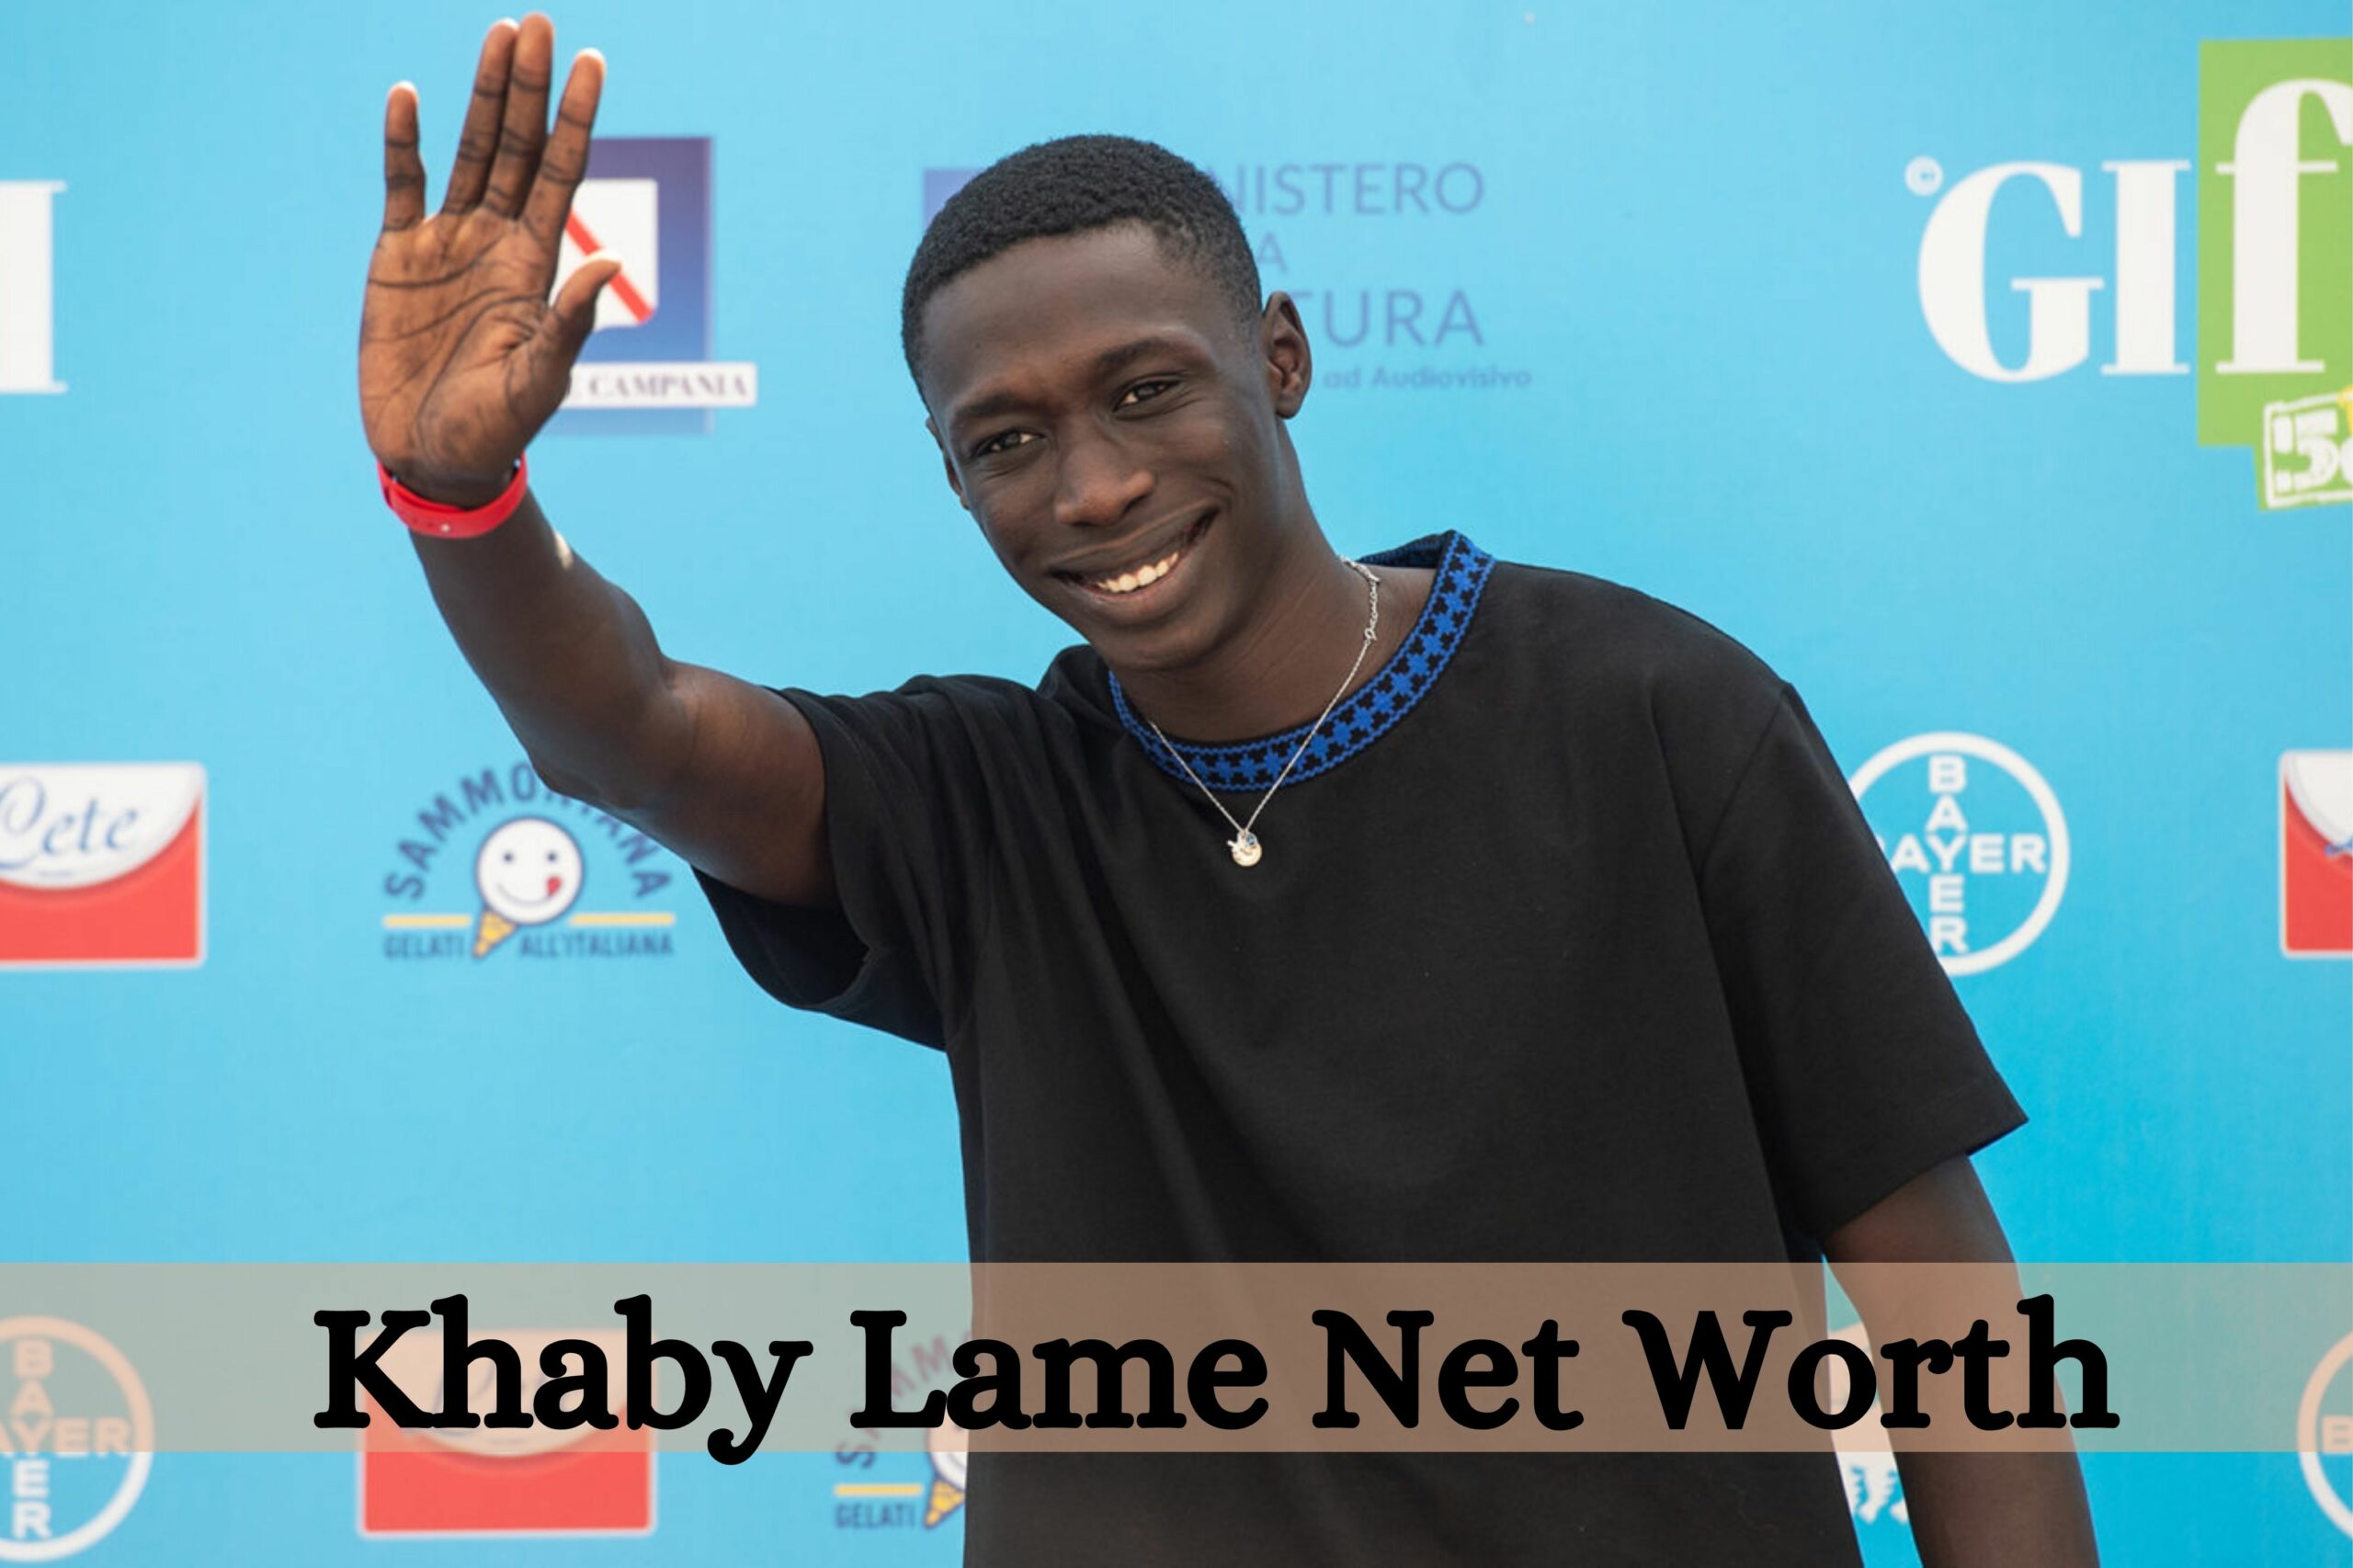 Khaby Lame Net worth, Career, TikTok Fame And Personal Life Details 2022!